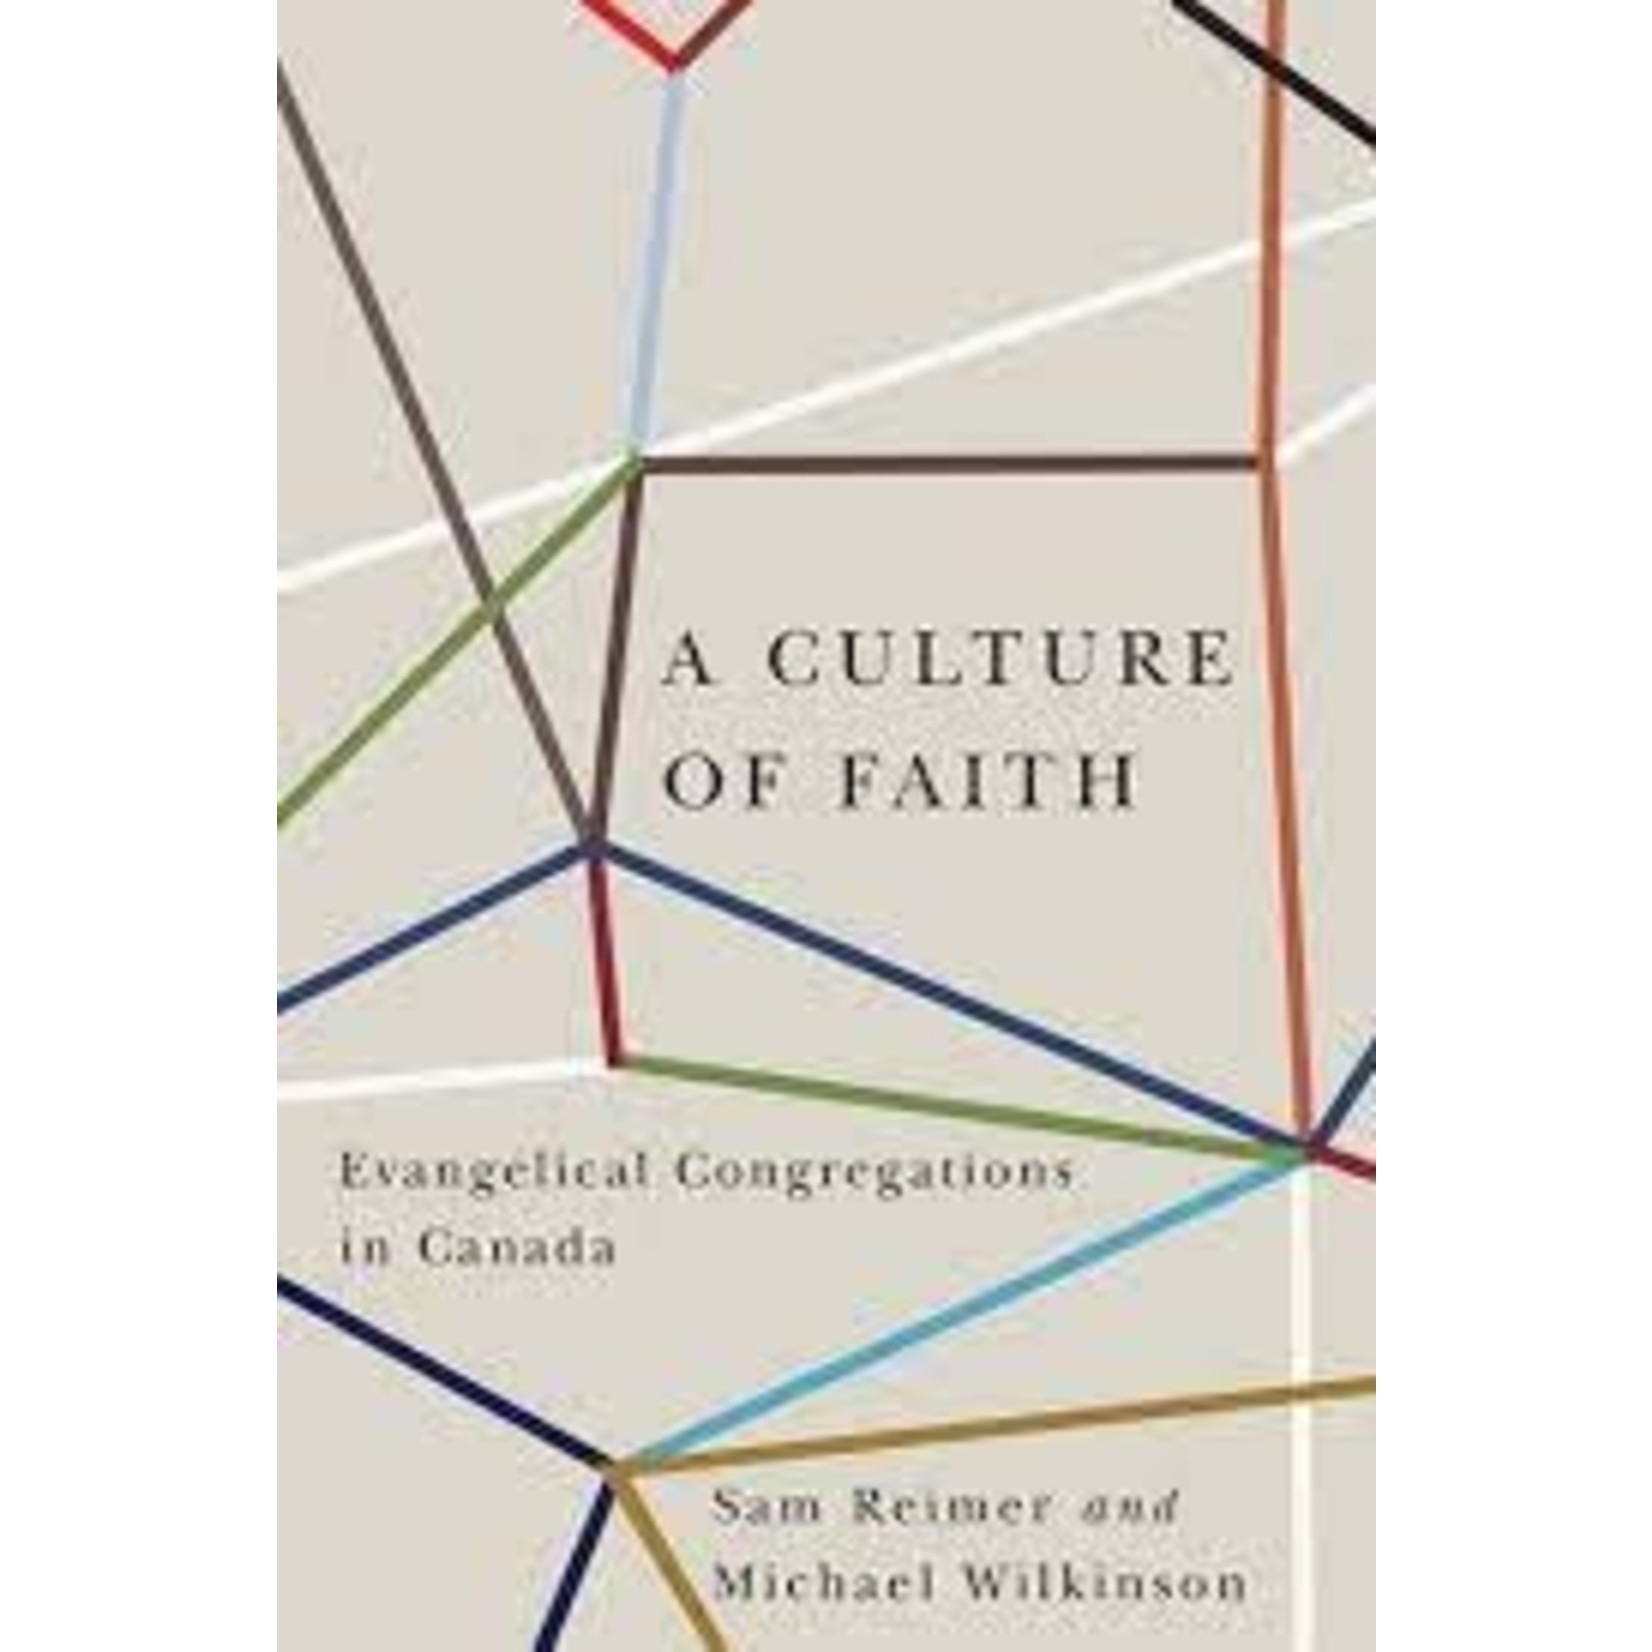 A Culture of Faith: Evangelical Congregations in Canada